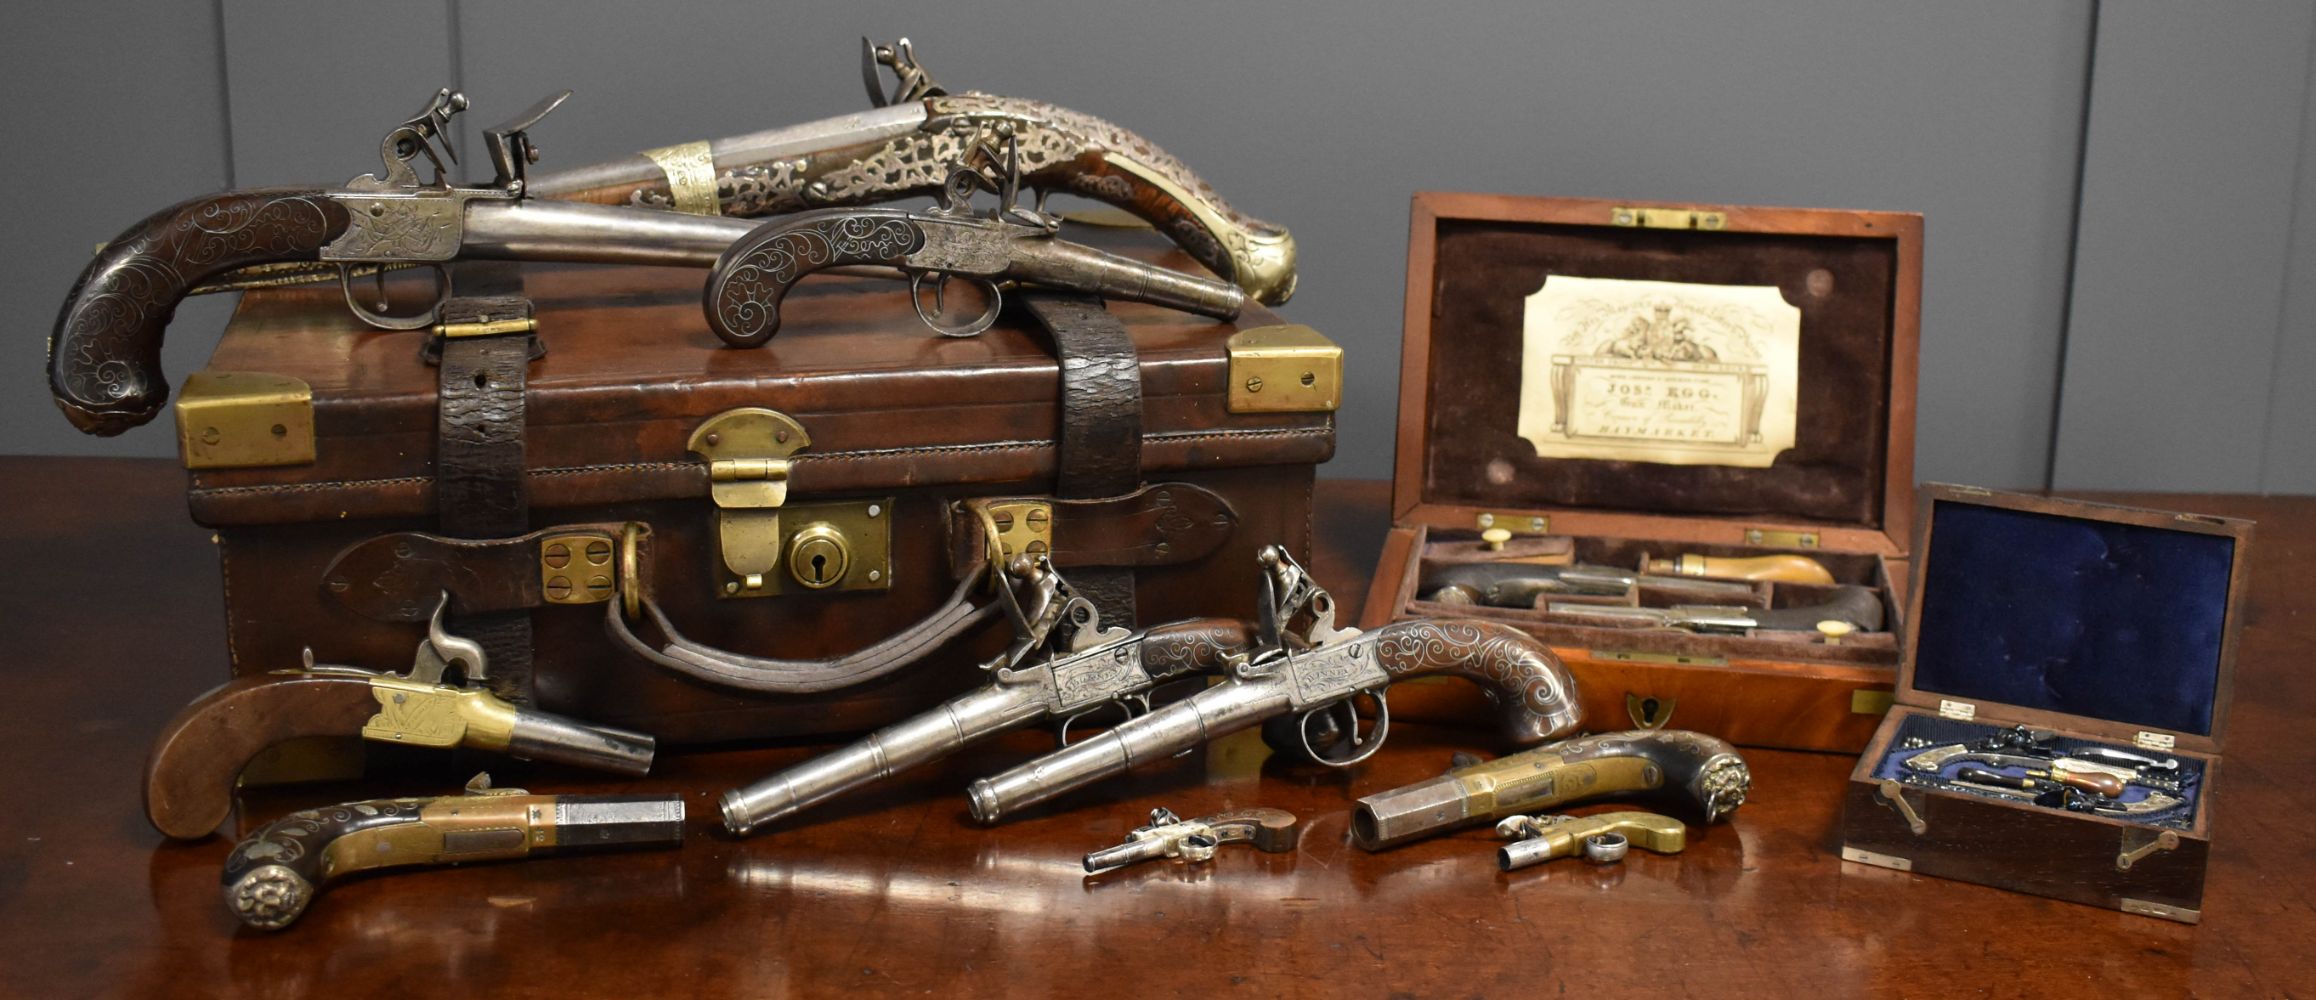 Militaria, Scientific, Toys & Sporting, together with Collectables